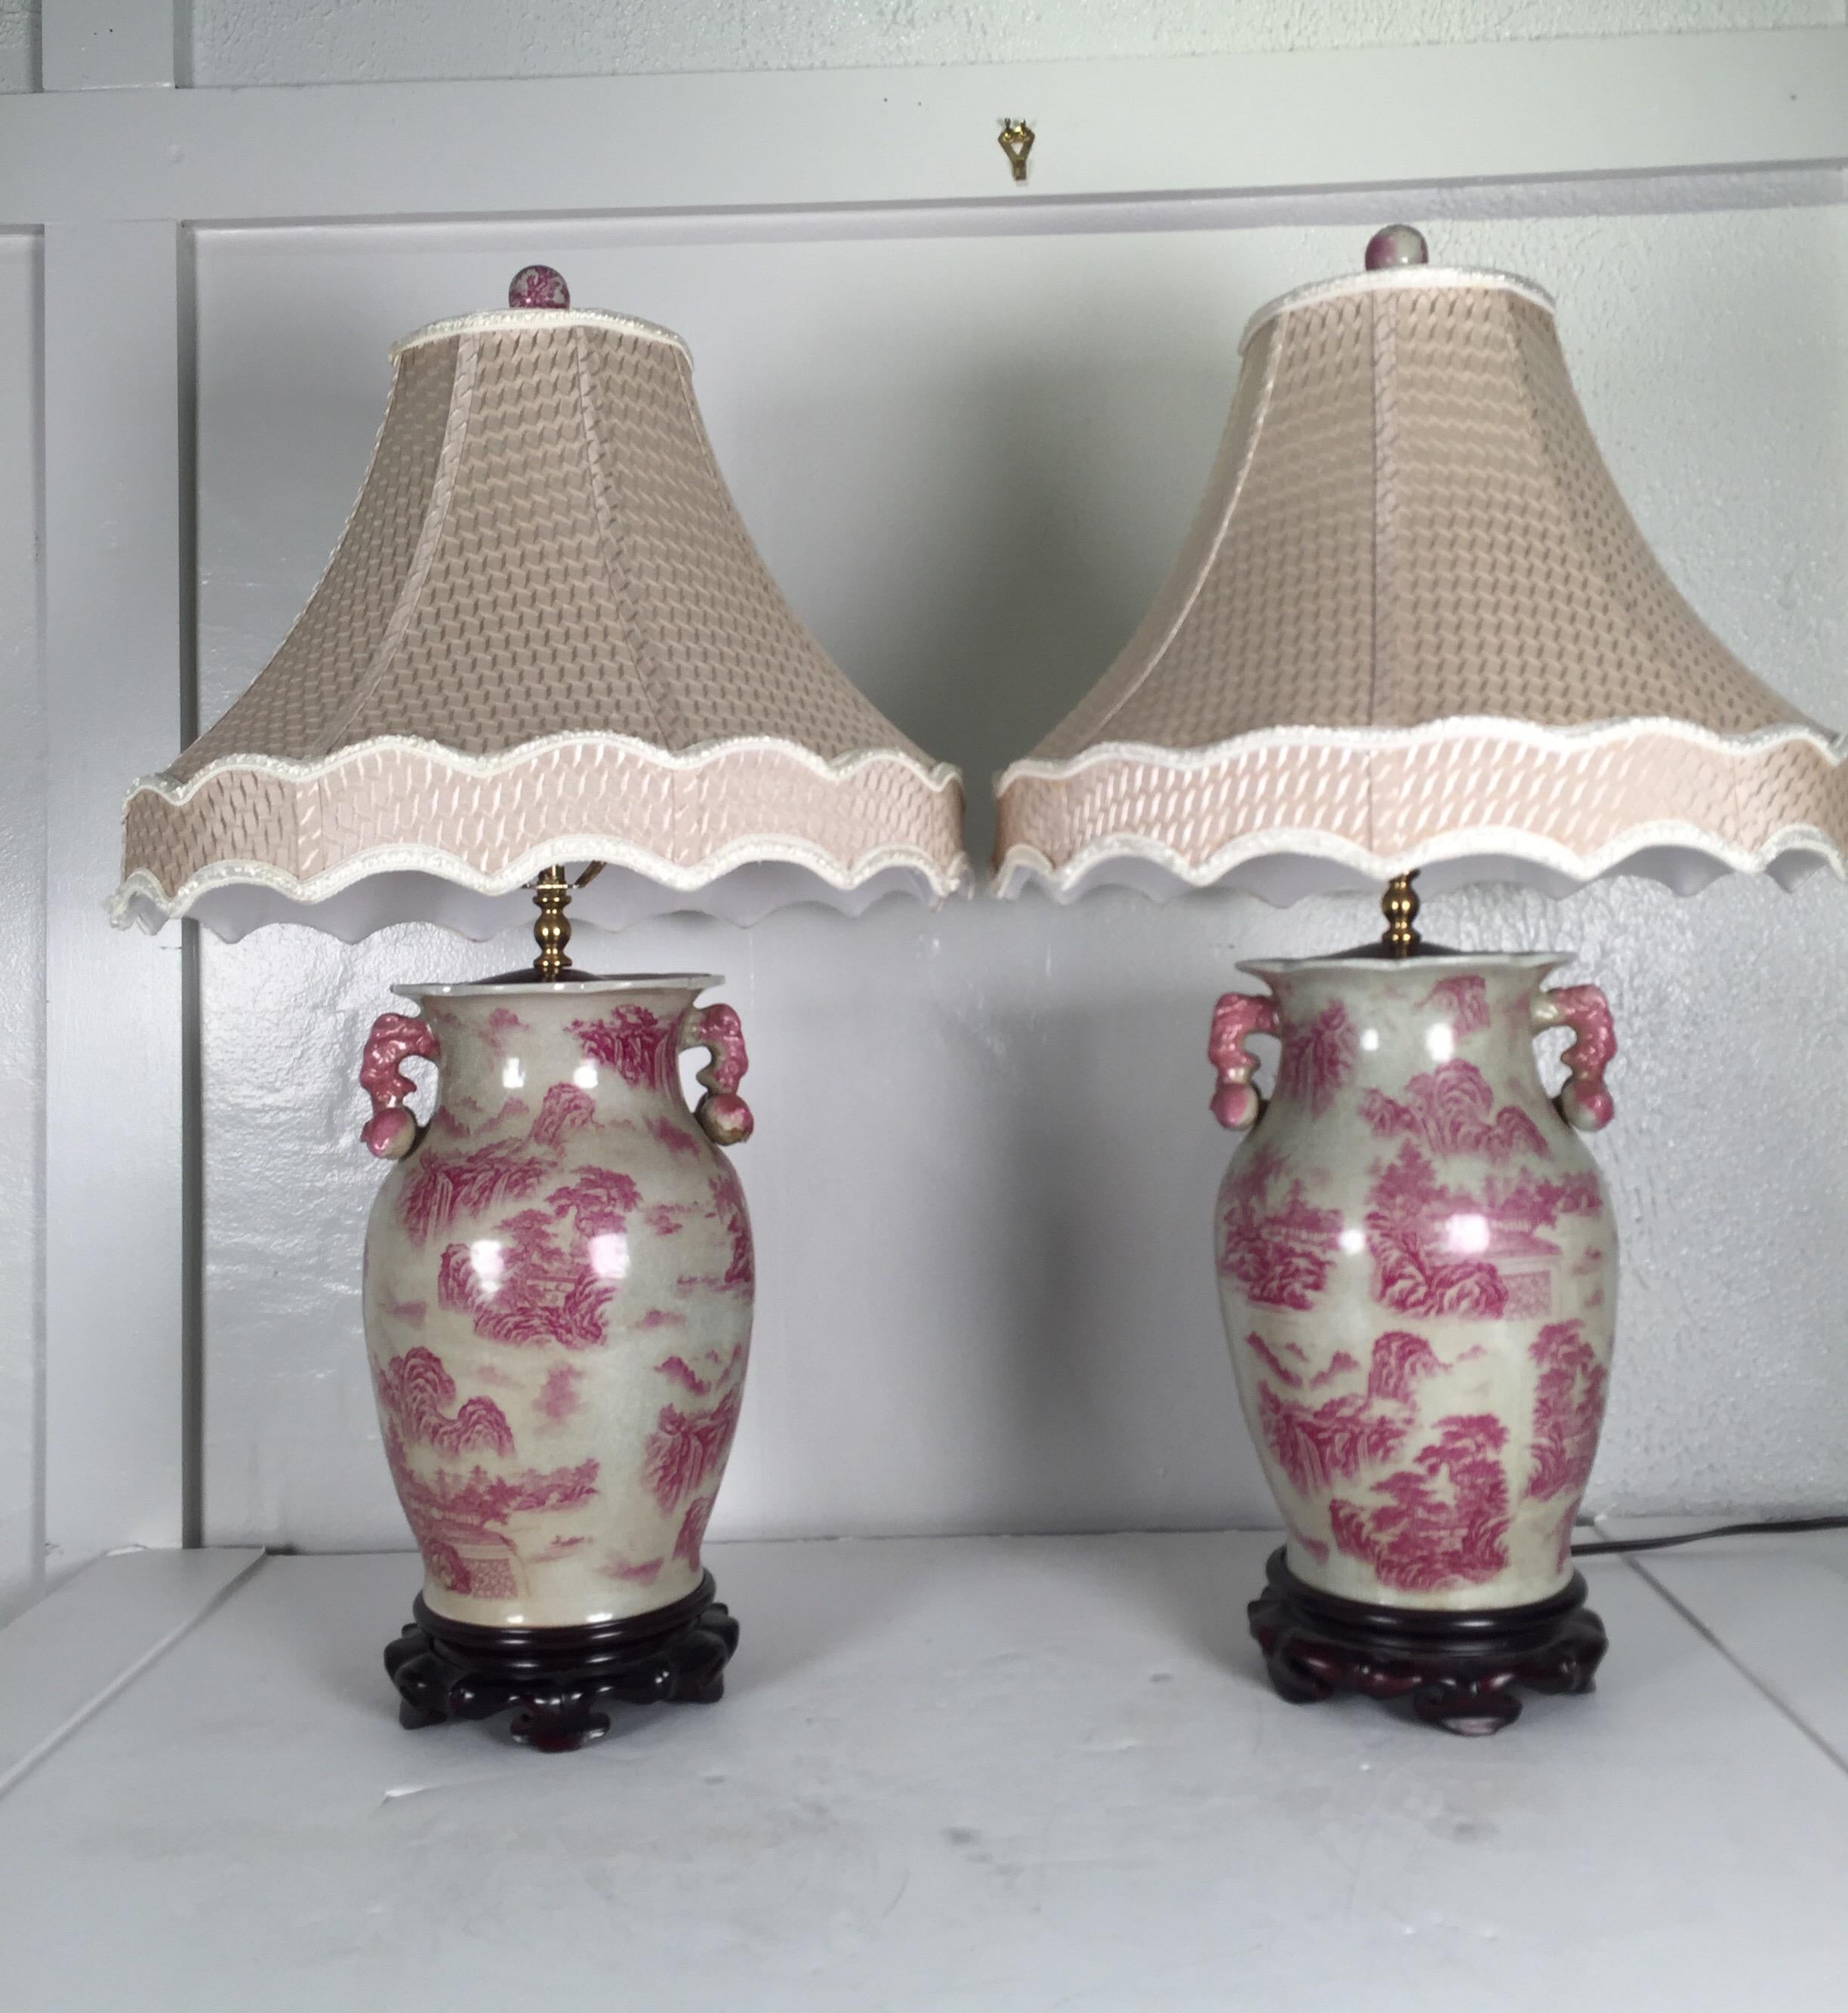 Elegant pair of porcelain chinoiserie table lamps with mahogany bases, both with scalloped lamp shades.